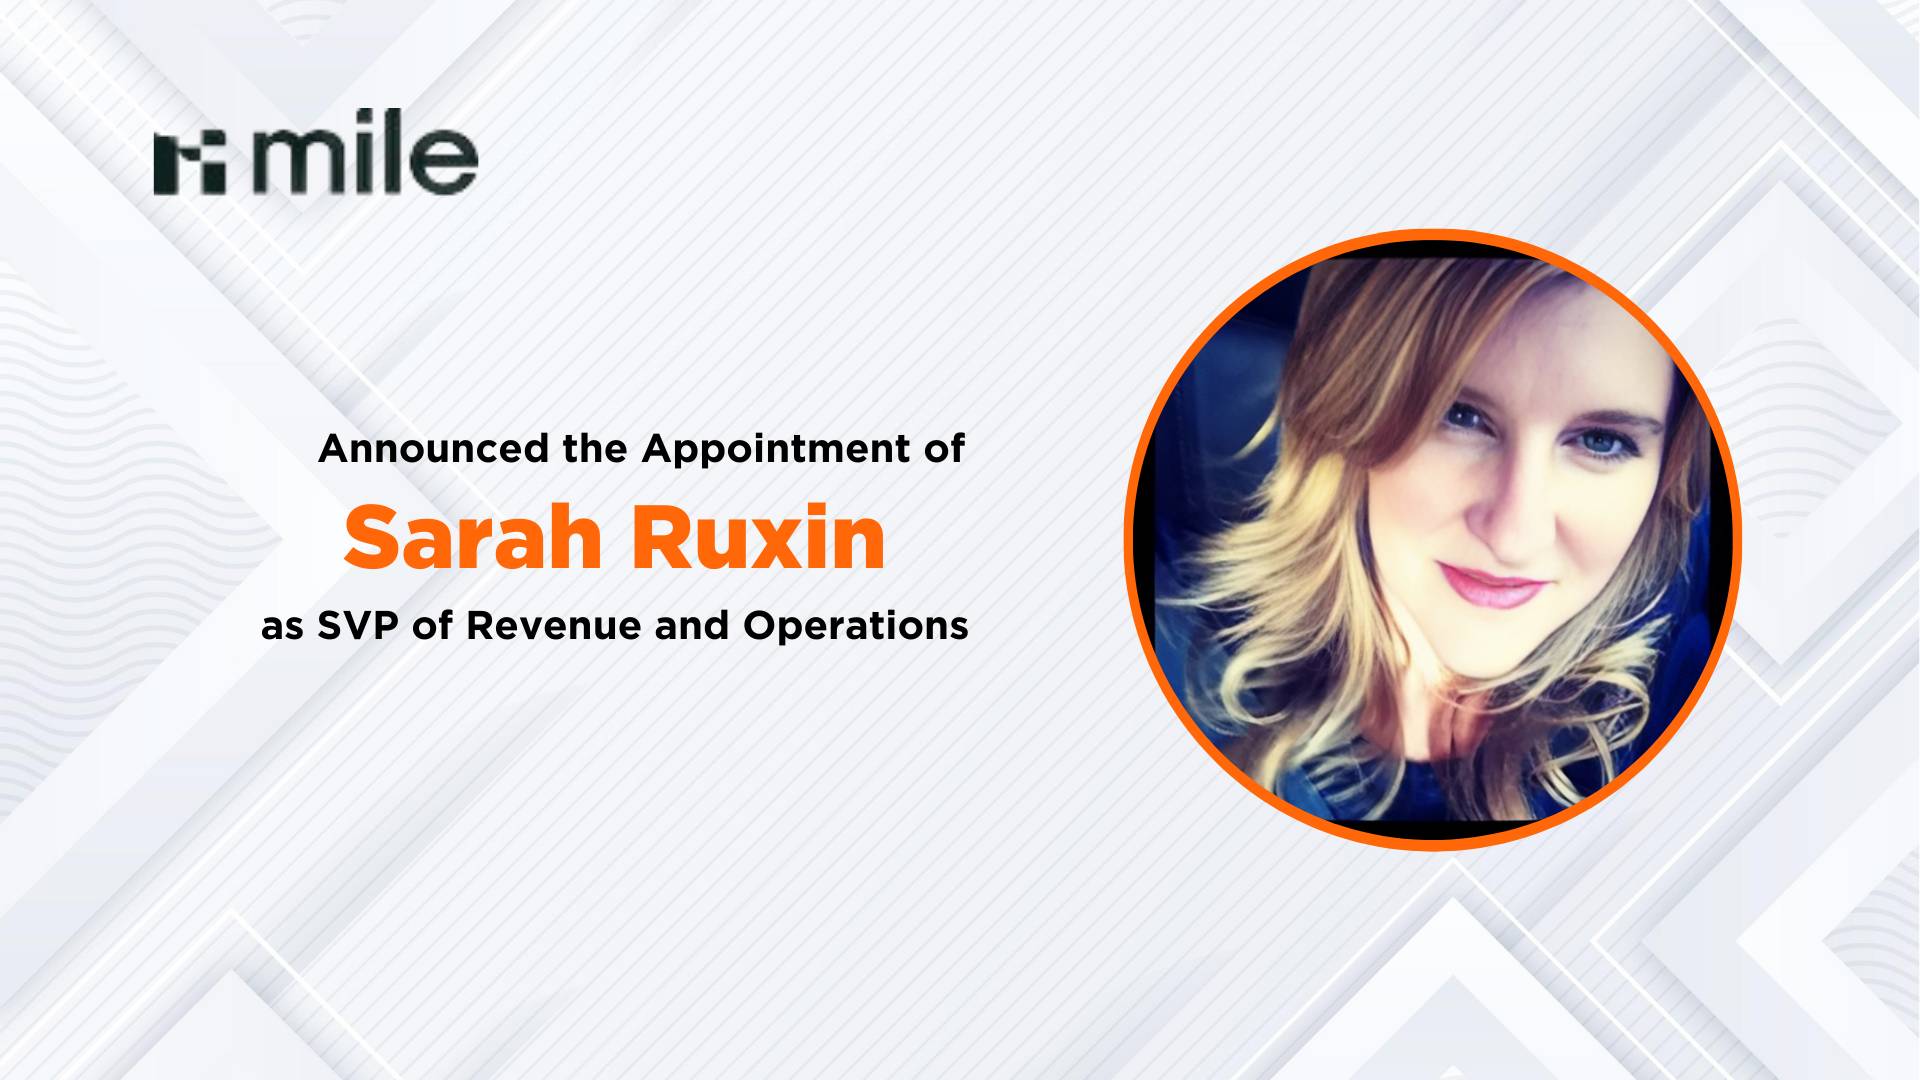 Mile Appoints Sarah Ruxin as SVP of Revenue and Operations